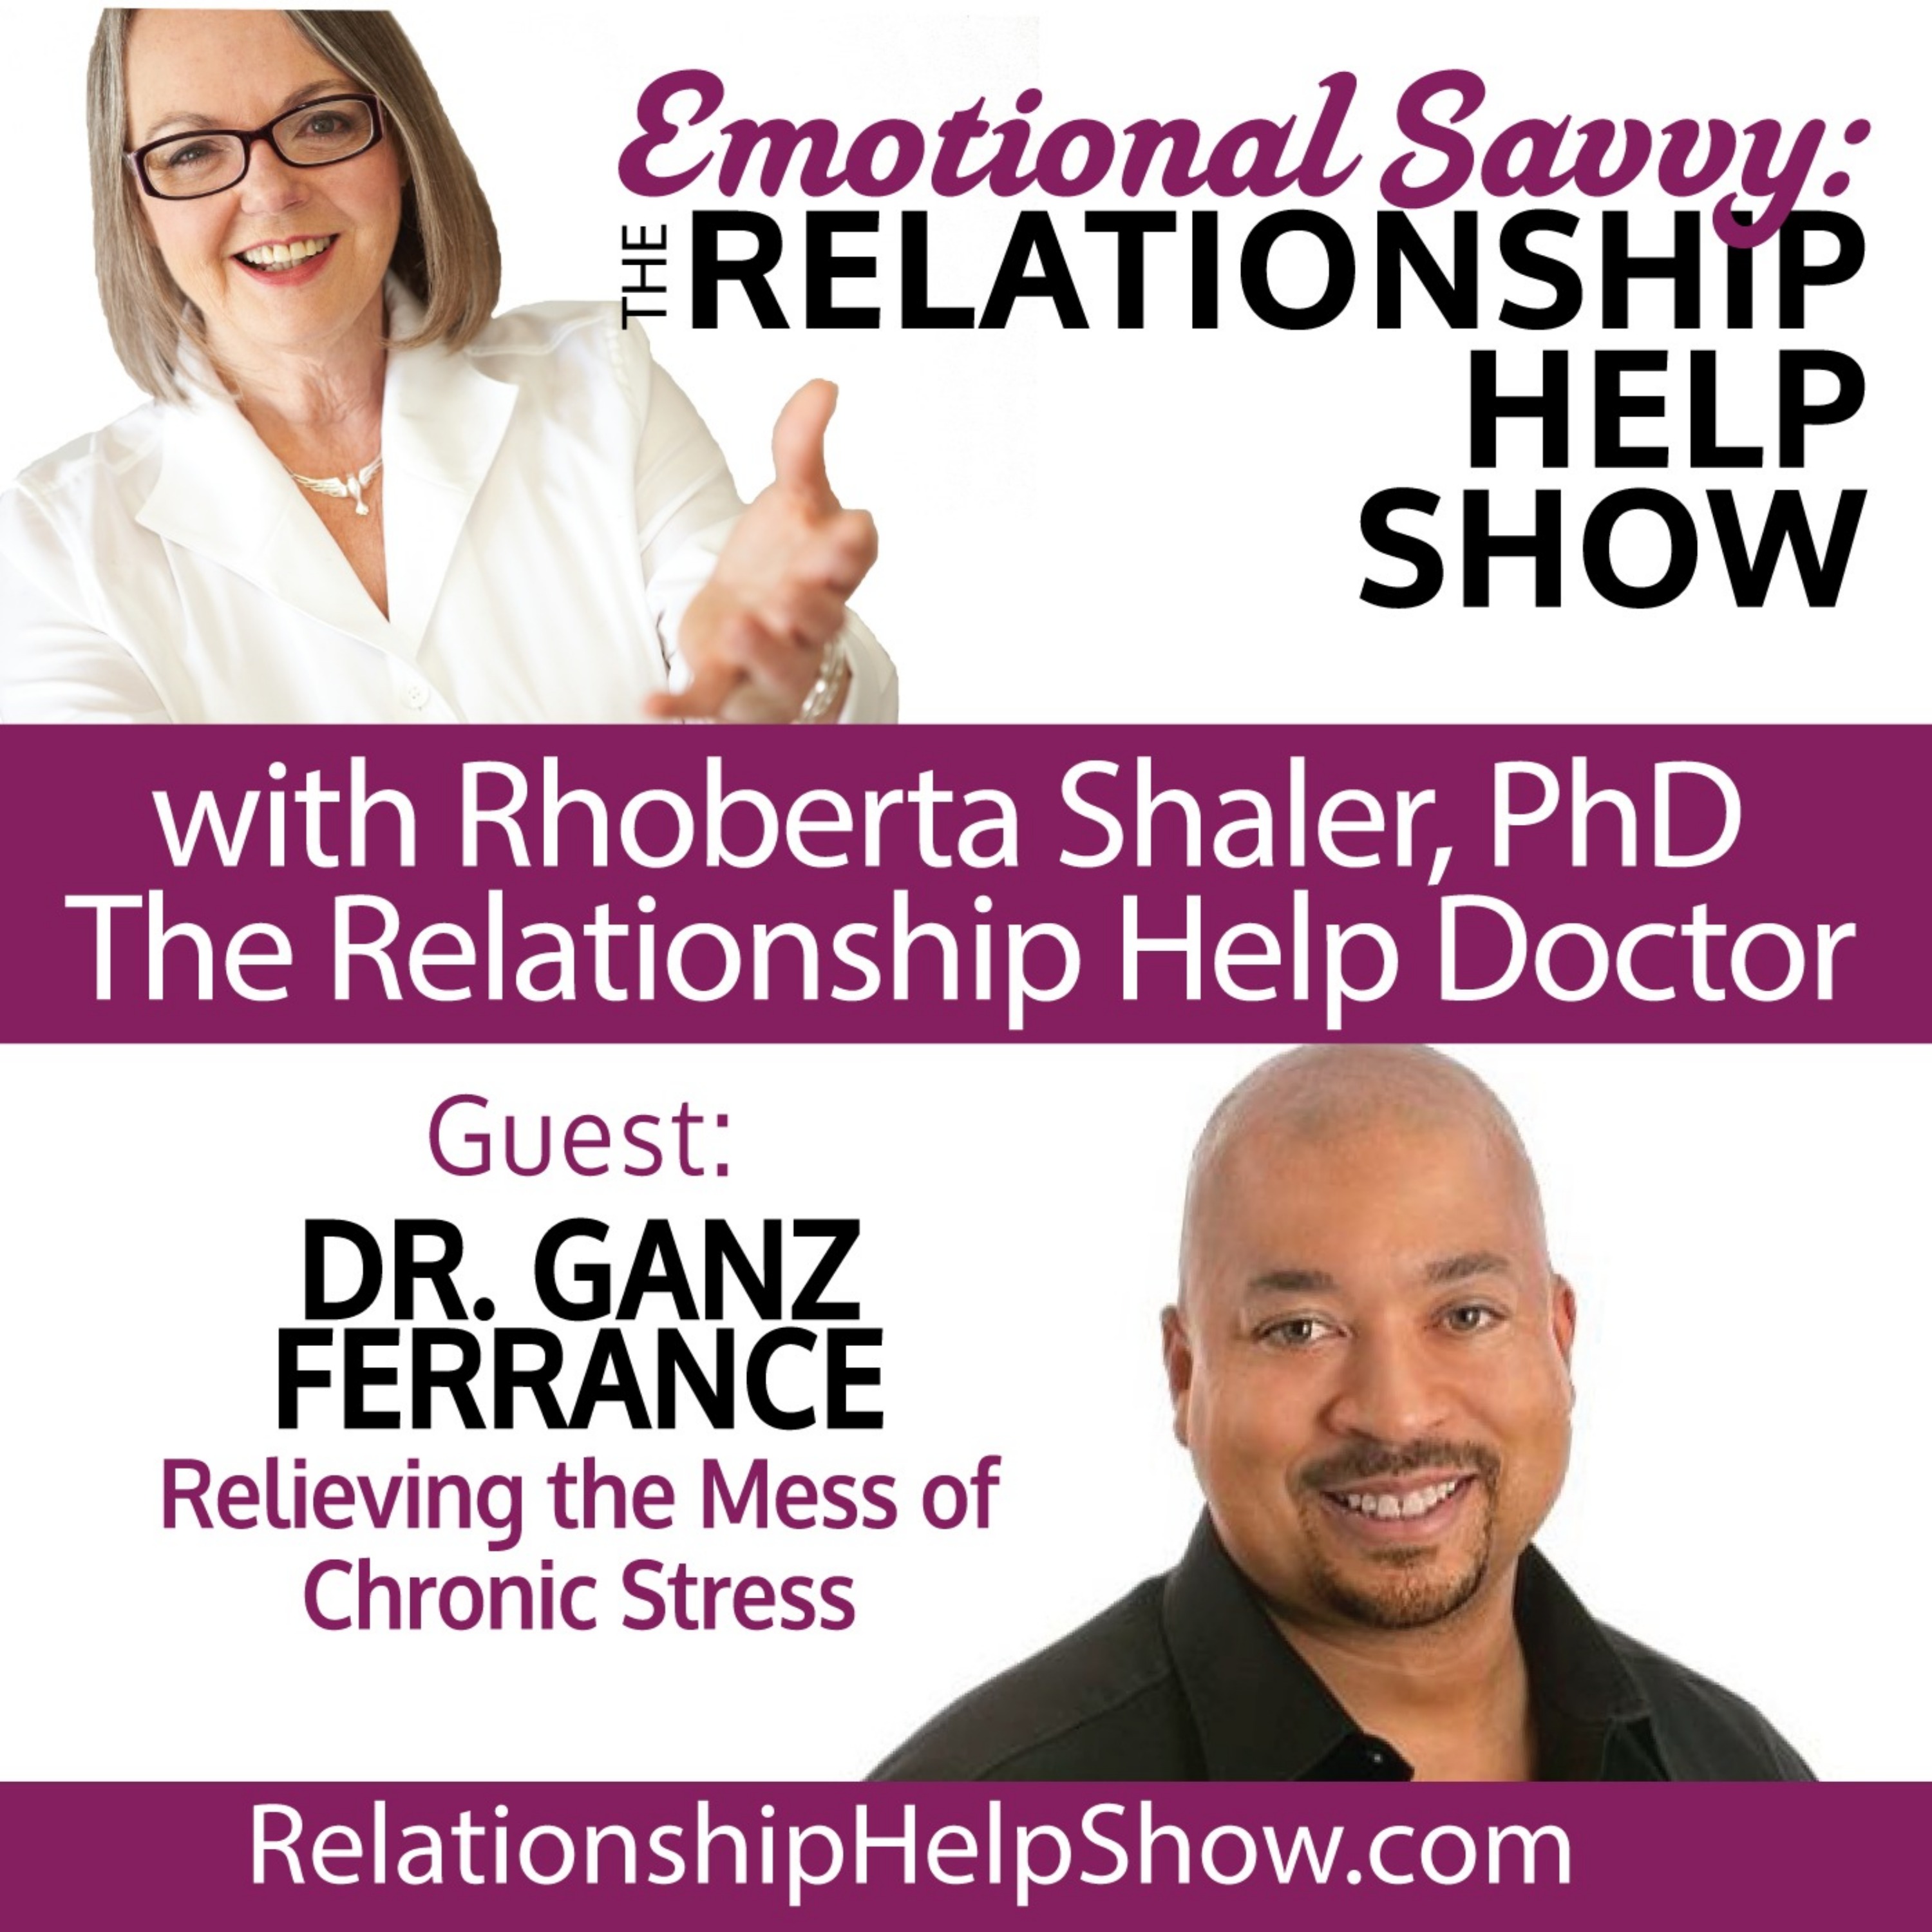 Relieving the Mess of Chronic Stress in Toxic Relationships  GUEST: Dr. Ganz Ferrance